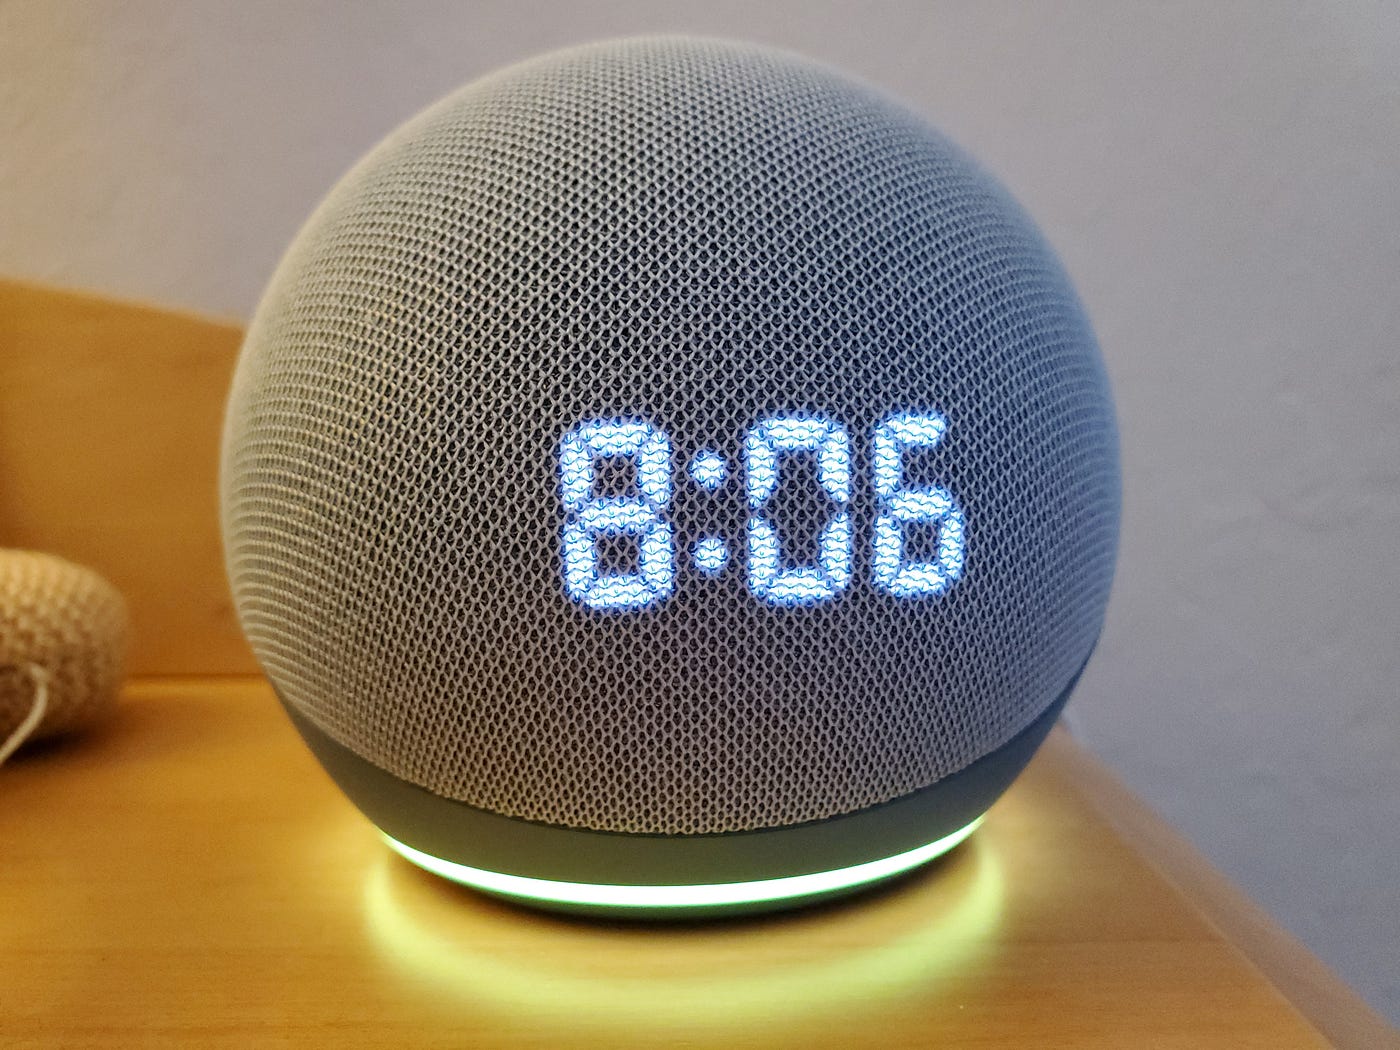 What Do The Colors Mean On Alexa Echo Dot